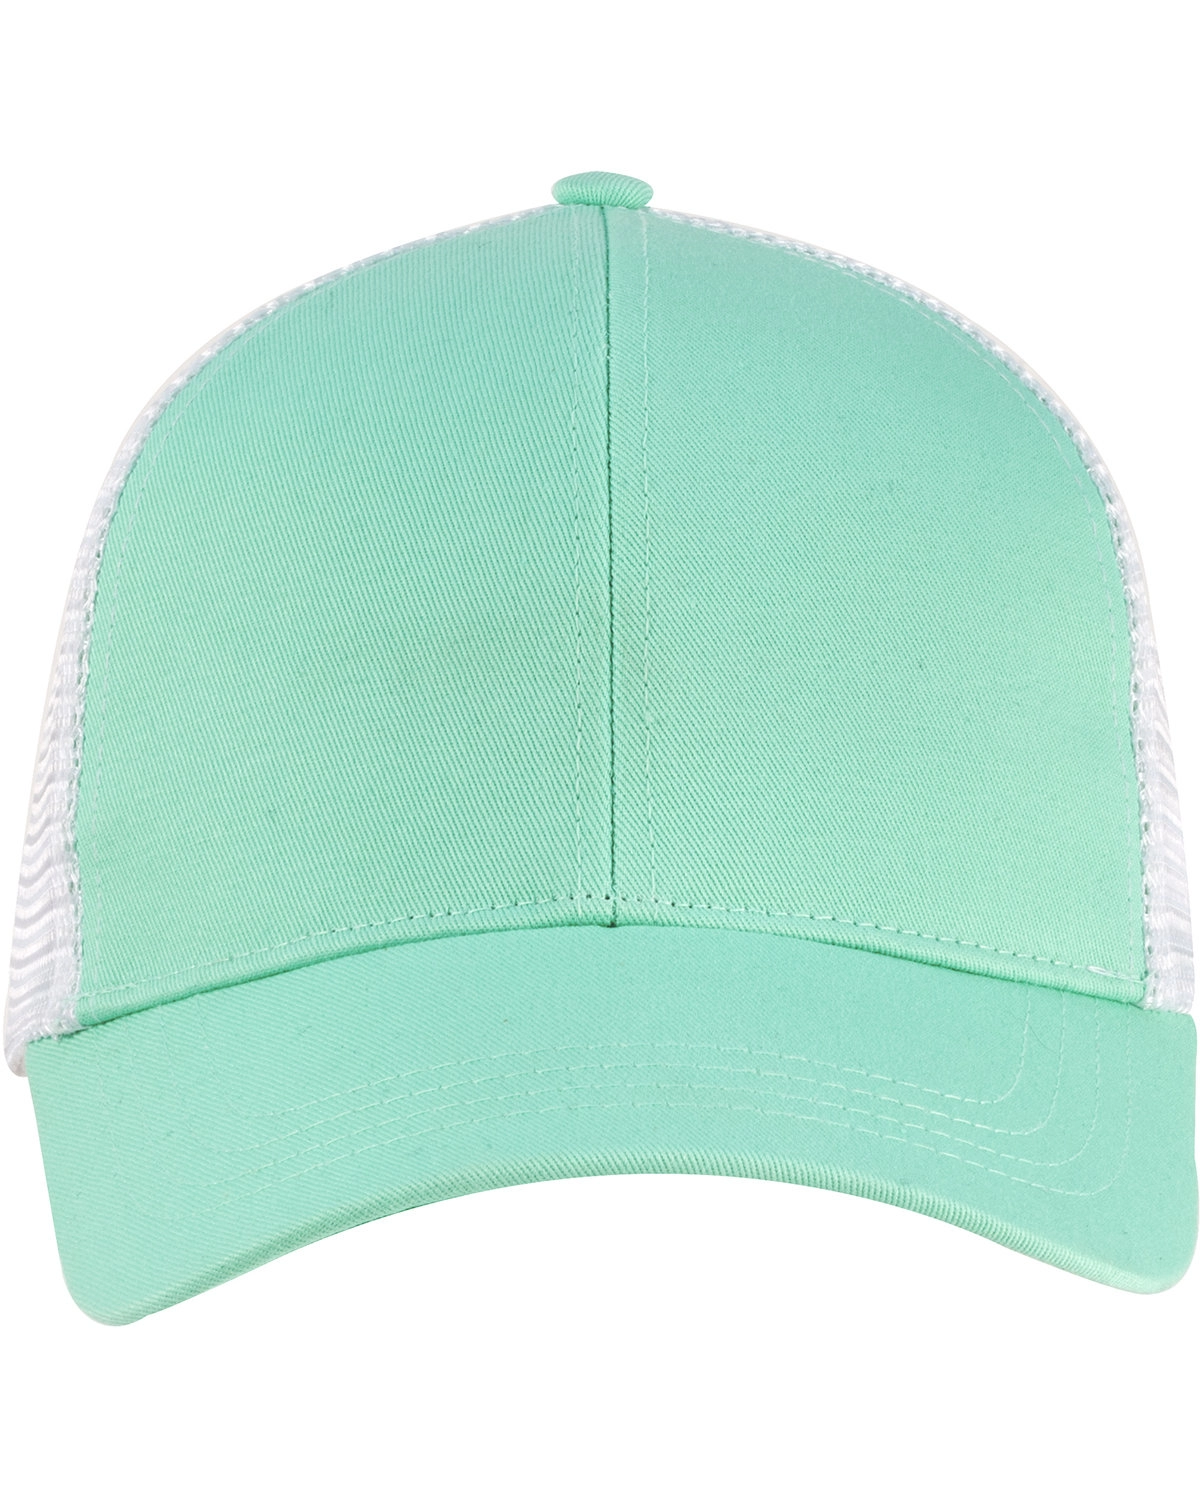 Organic/Recycled econscious Eco EC7070 From - Trucker